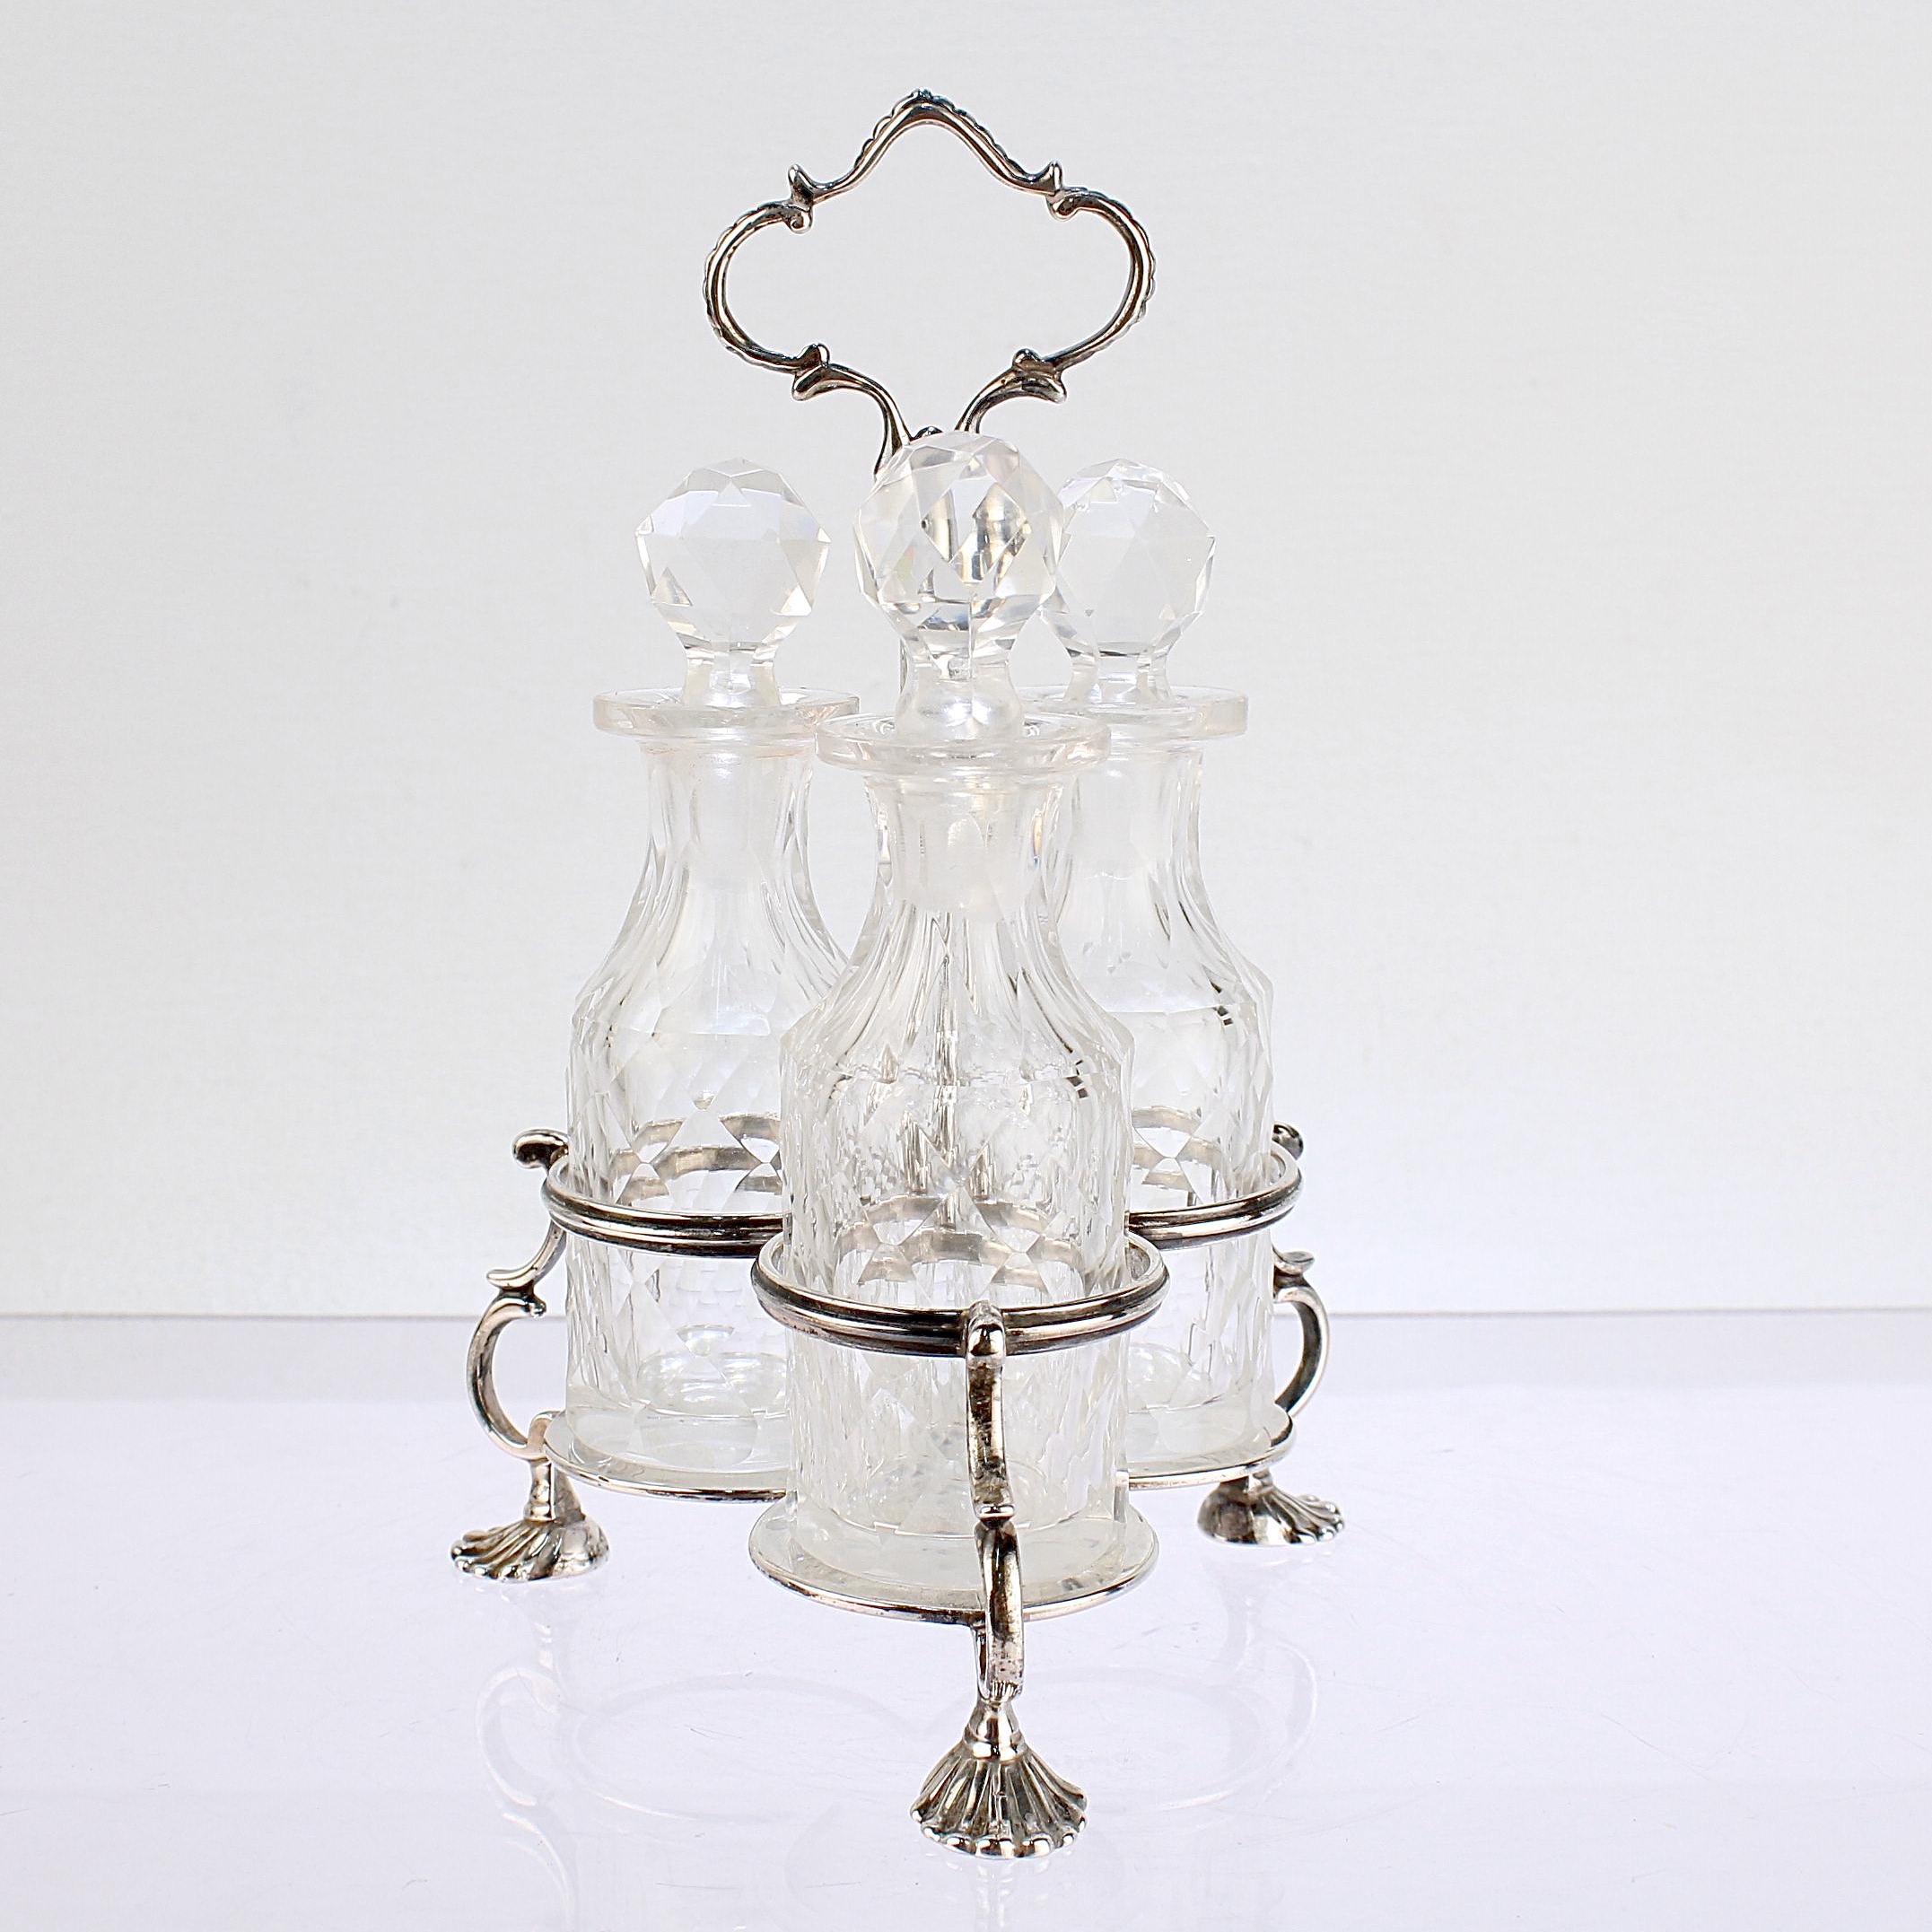 A fine antique Victorian cruet set.

Made George John Richards & Edward Charles Brown of London, England. 

Comprising of a sterling silver stand with 3 small cut glass cruet bottles. 

Marked for 1866.

Simply a wonderful example of Victorian